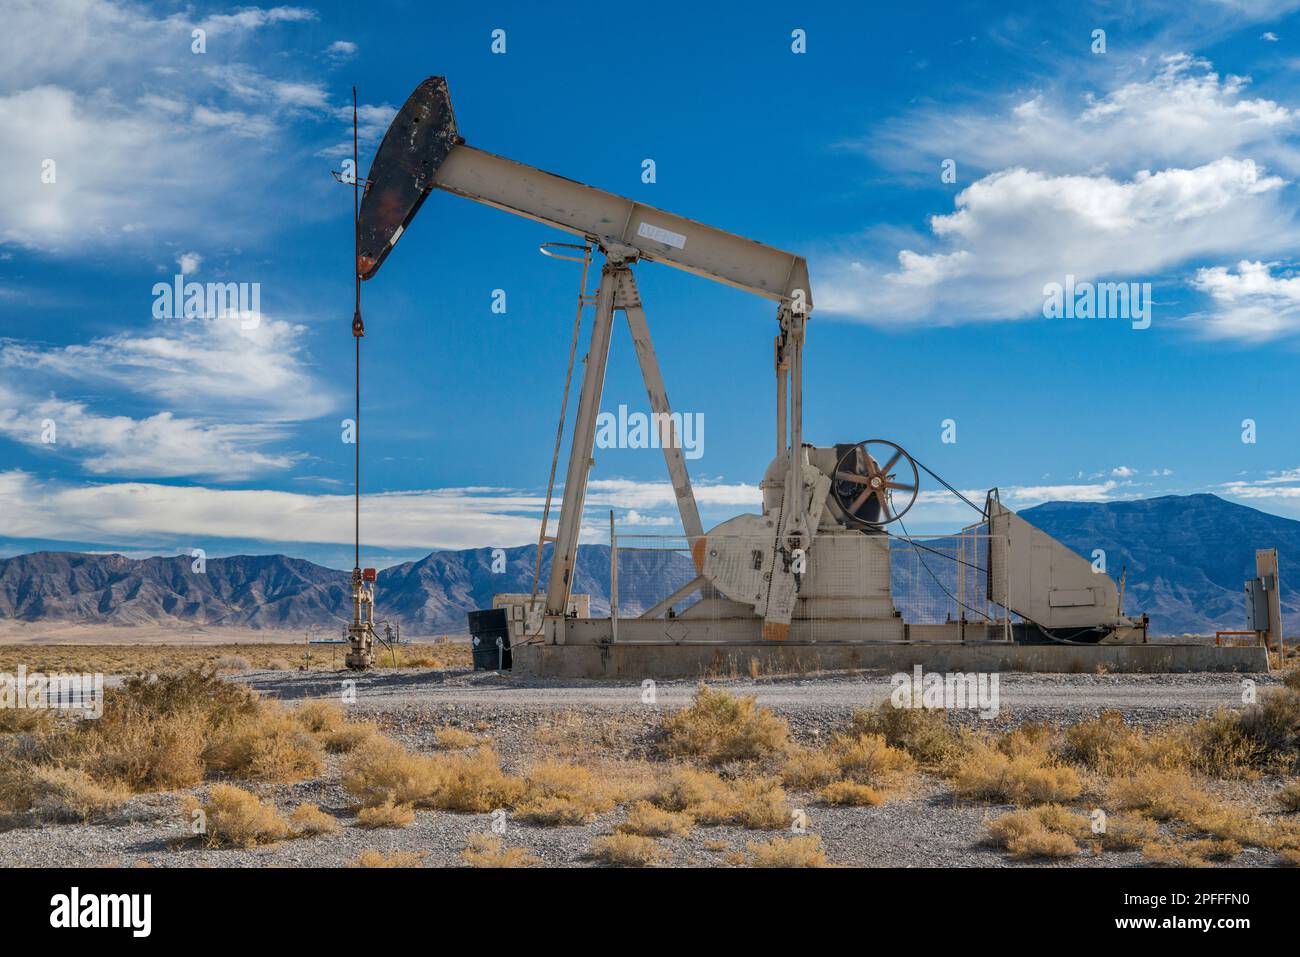 Pumpjack at oil well, Makoil Trap Spring Oil Field, Railroad Valley, Great Basin Desert, US-6 highway, 12 mi southwest of Currant, Nevada, USA Stock Photo